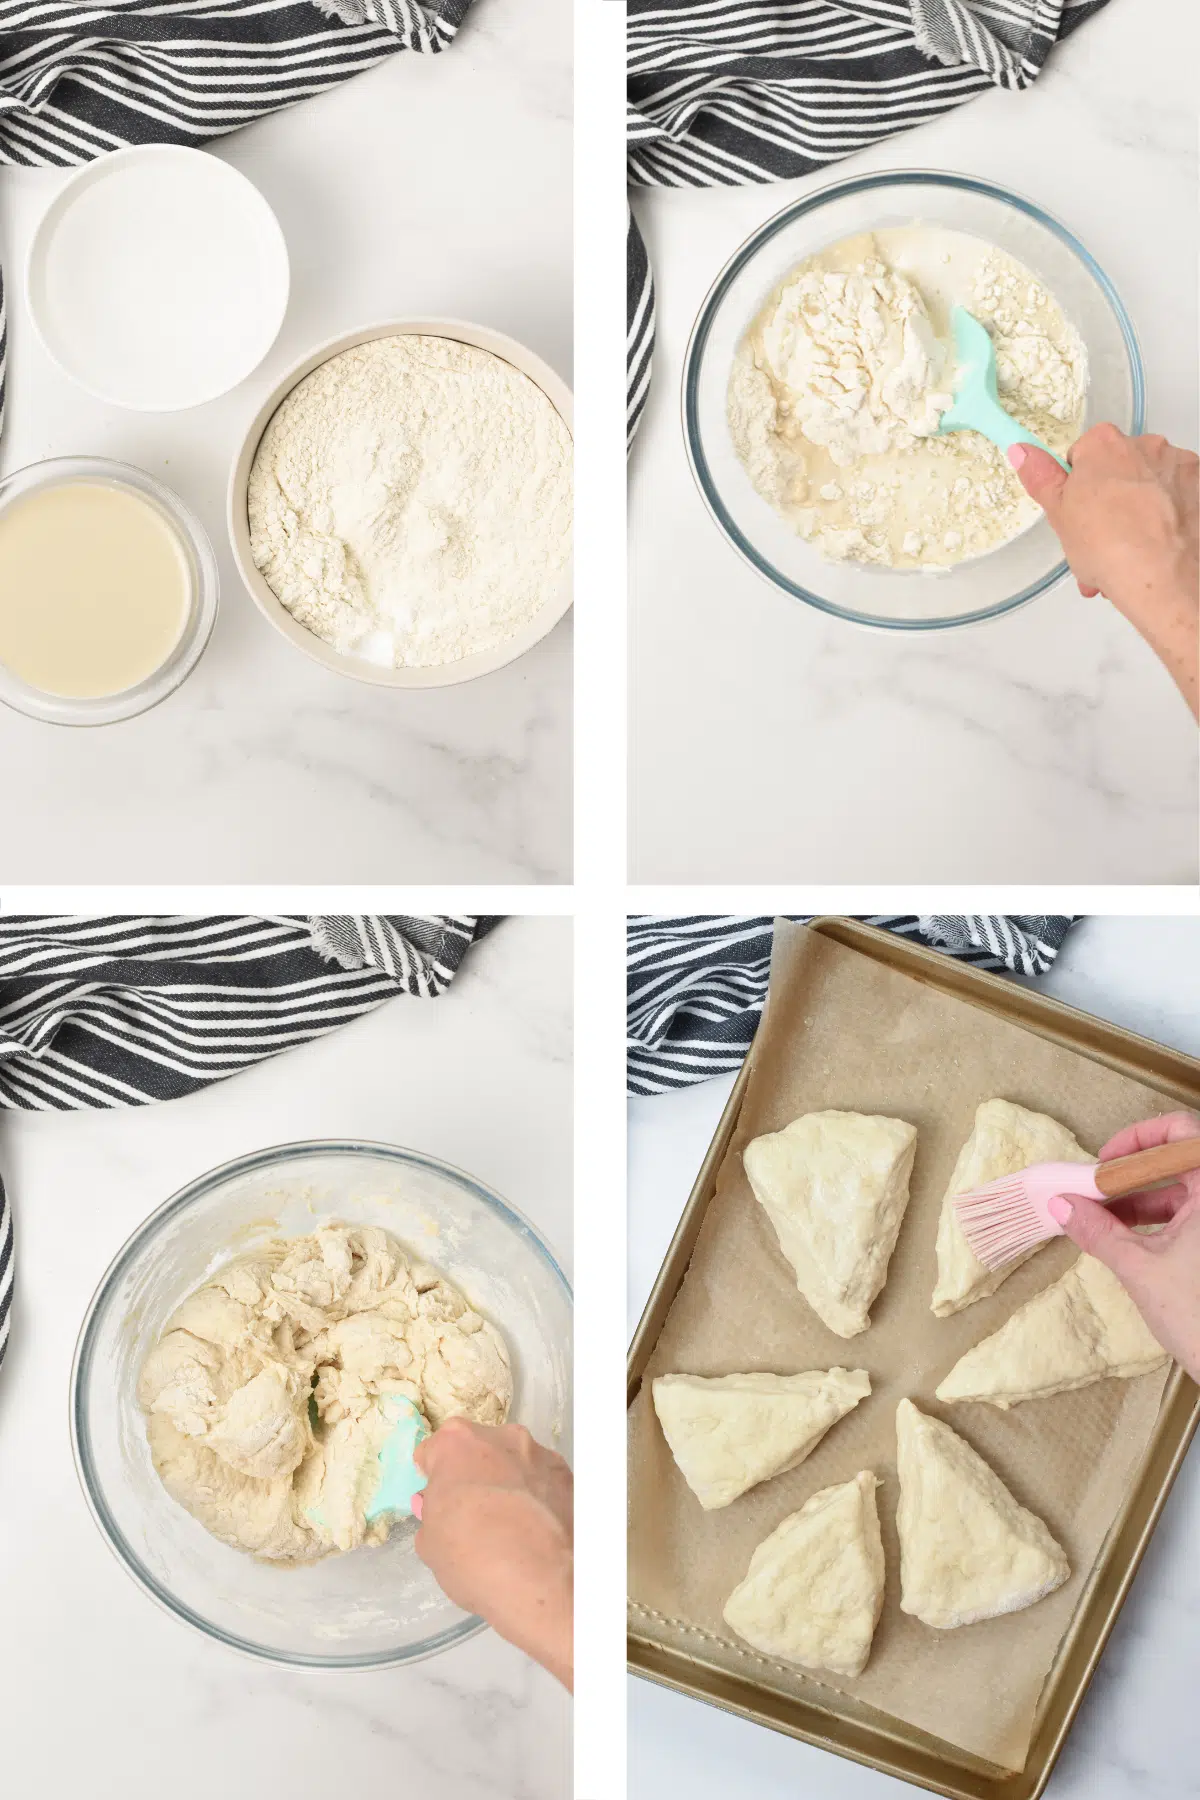 How to make 3 ingredient Scones